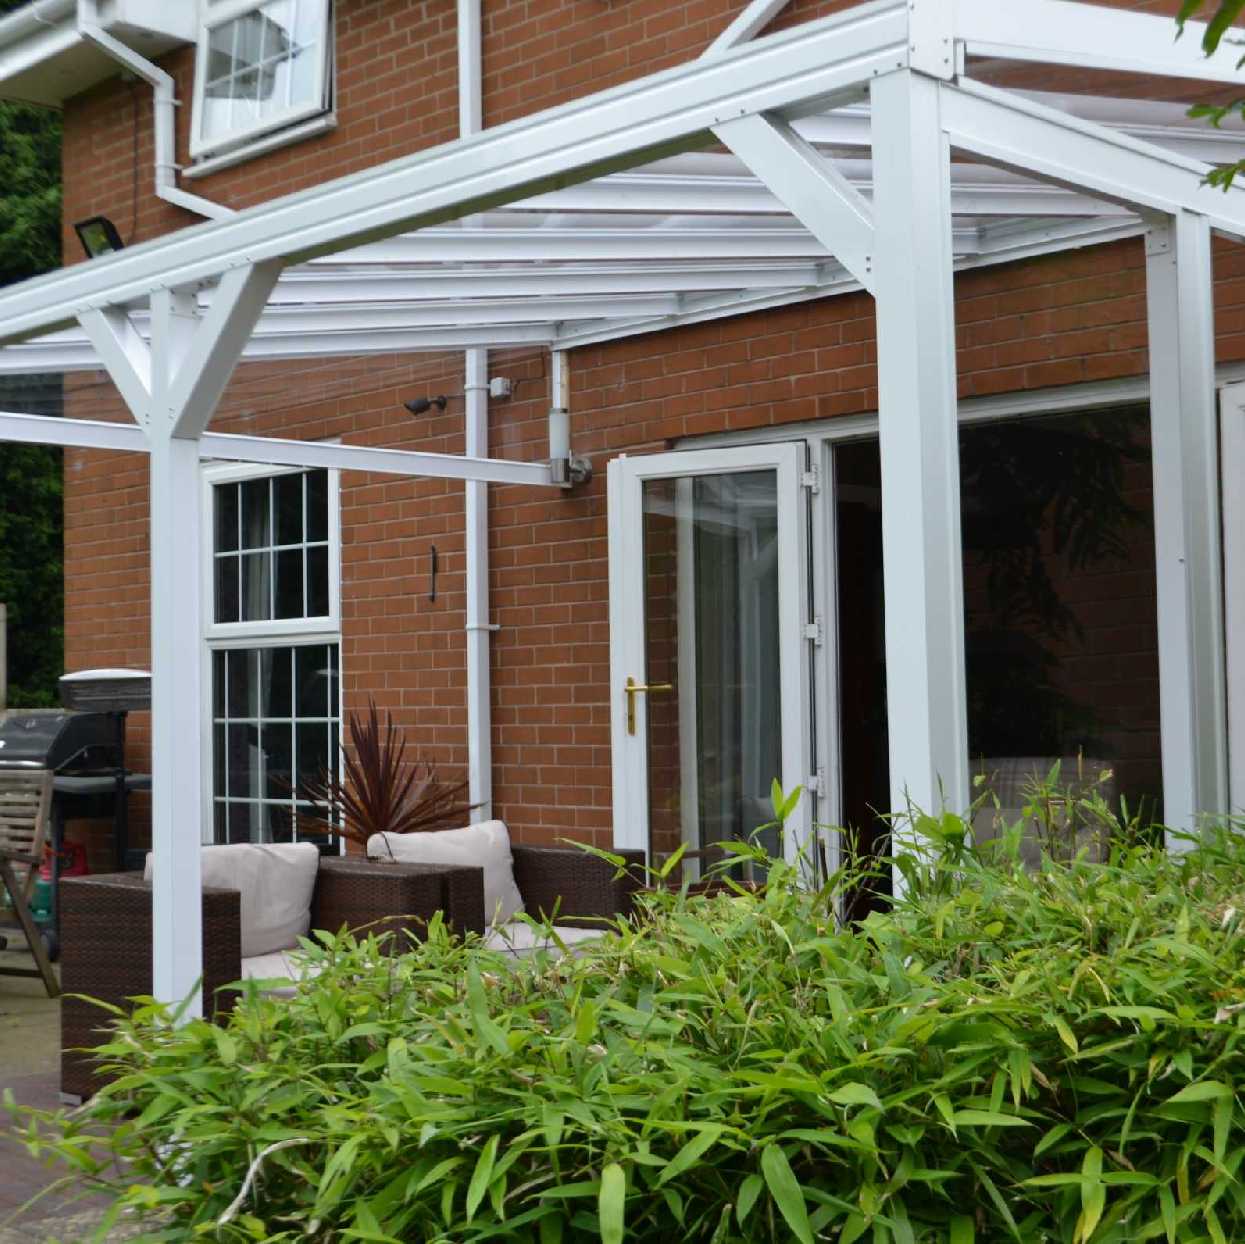 SPECIAL OFFER Omega Smart Lean-To Canopy, White with 6mm Glass Clear Plate Polycarbonate Glazing - 2.1m (W) x 1.5m (P), (2) Supporting Posts from Omega Build